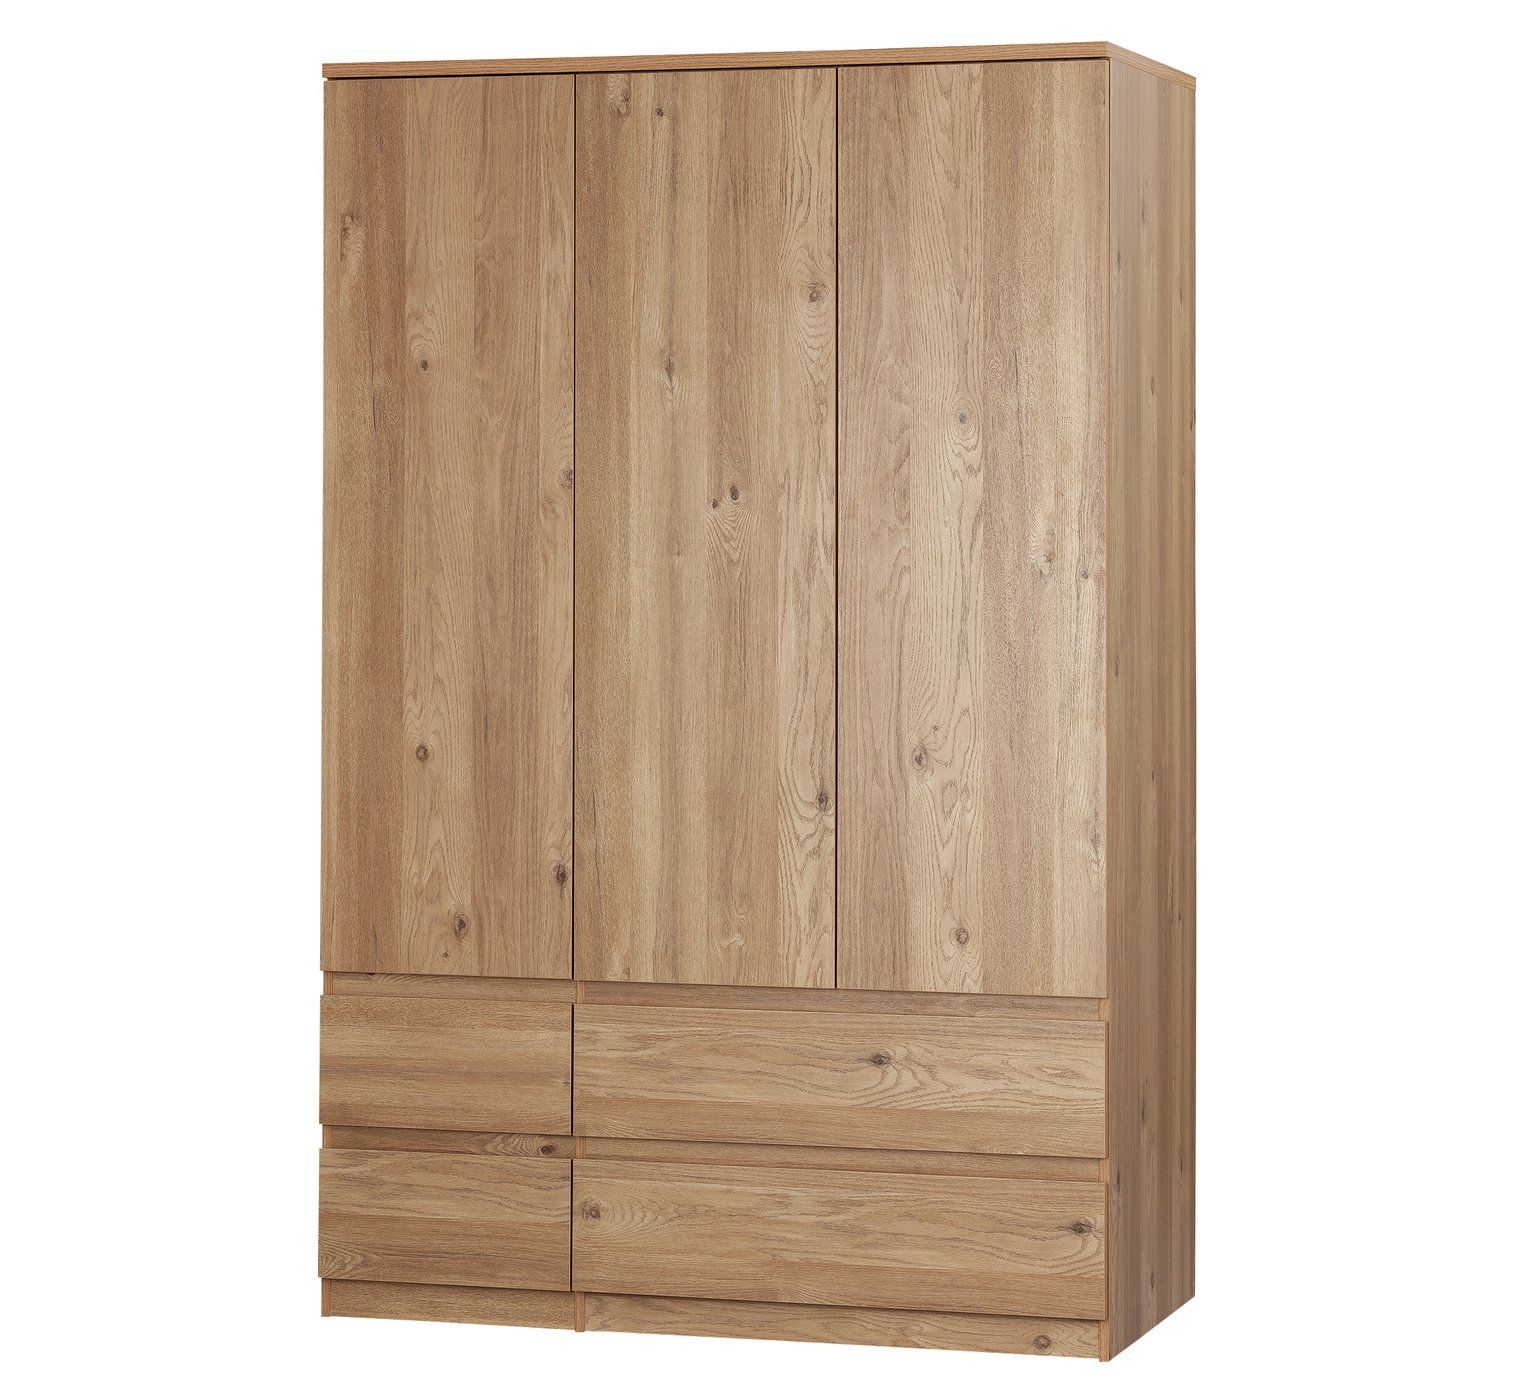 Malibu 2 Door 4 Drawer Sideboards Pertaining To Fashionable Wardrobes : Rosysphong, Your Online Shopping Store (View 17 of 20)